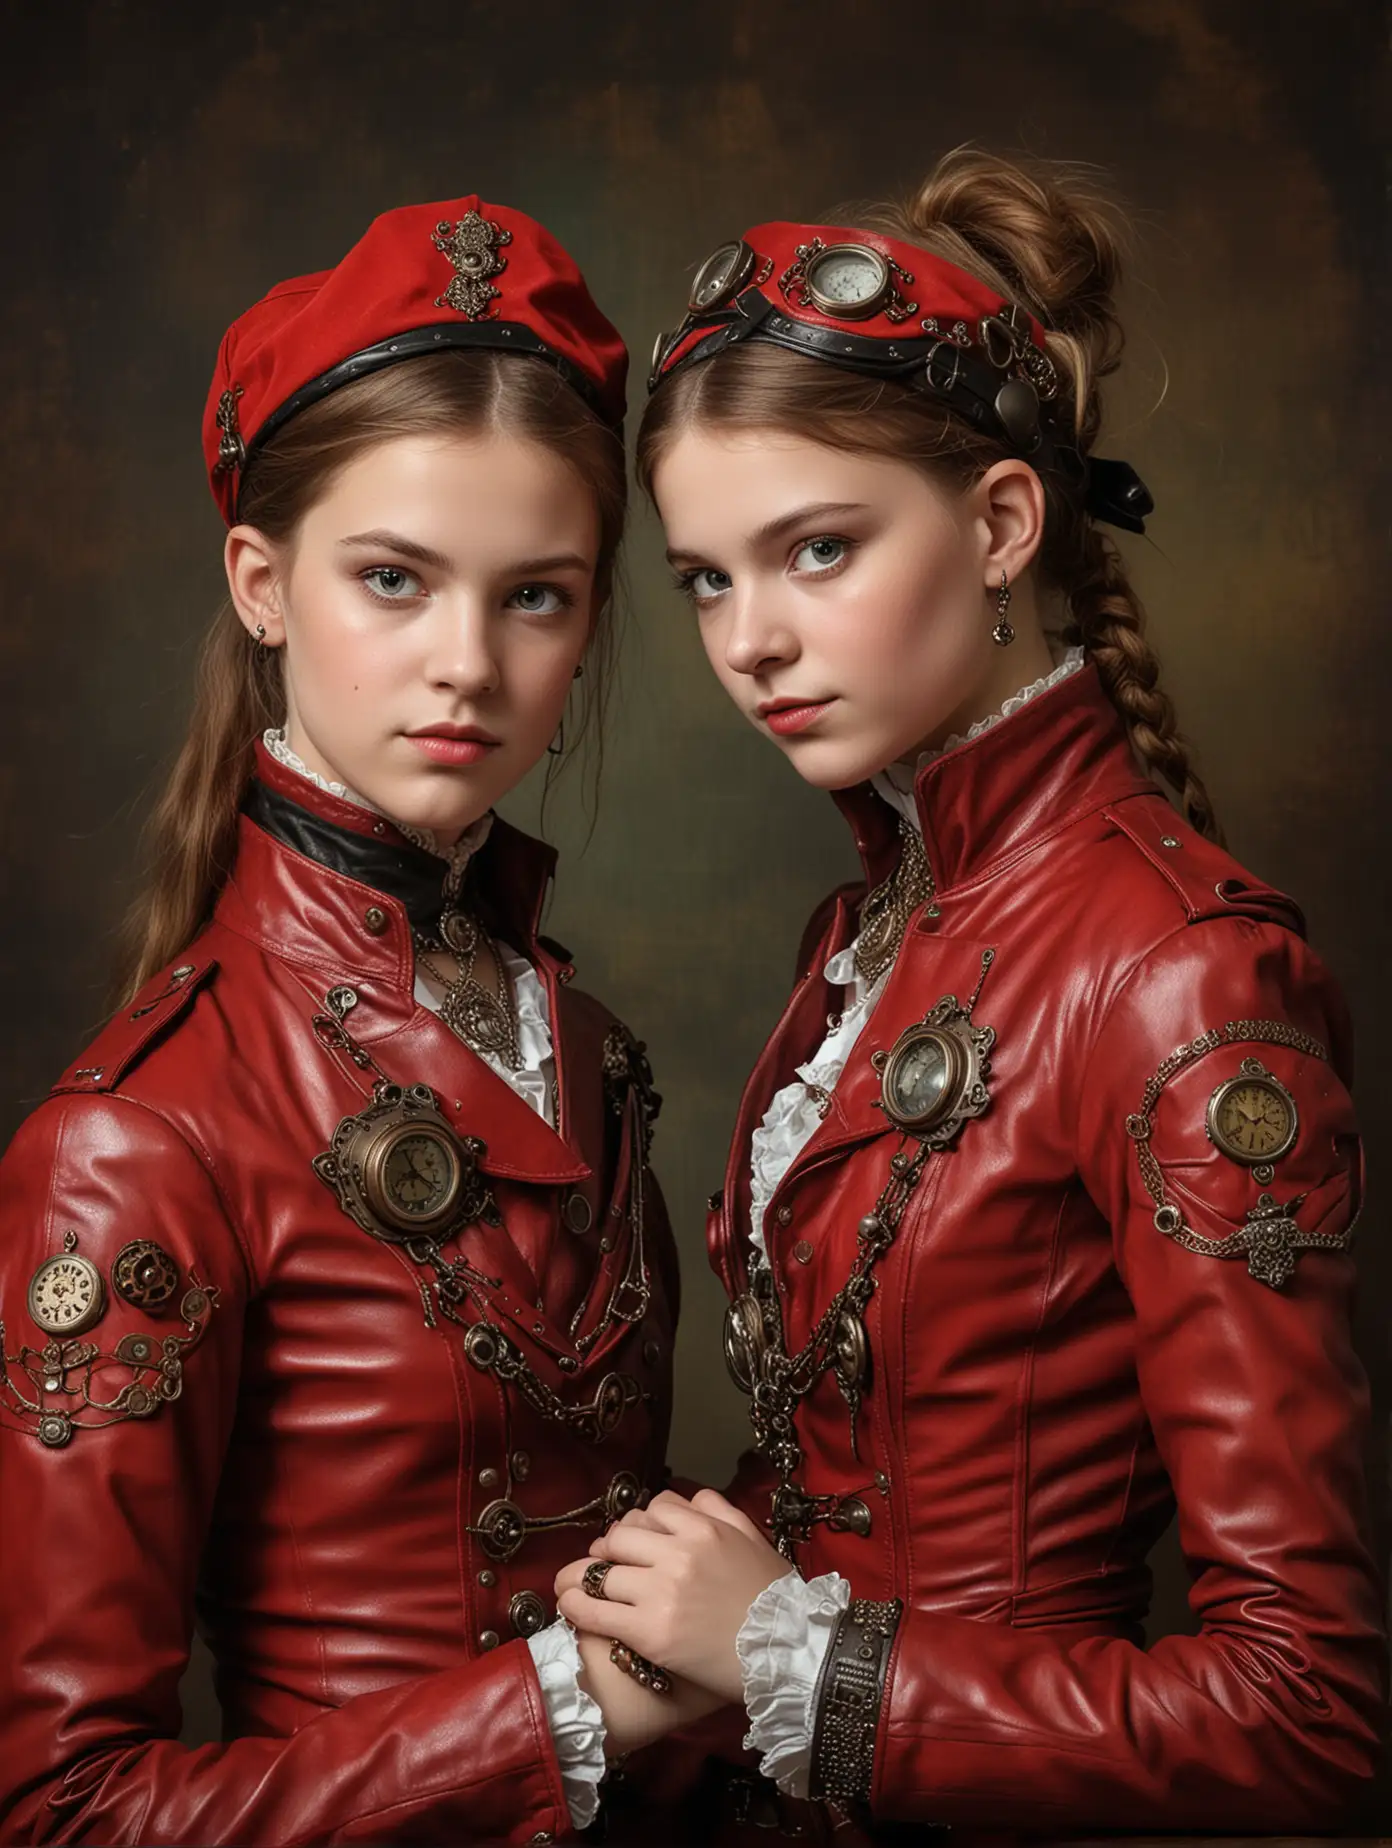 Steampunk Twin Sisters in Leather Red Suits Vintage Dutch Painting Style Portraits